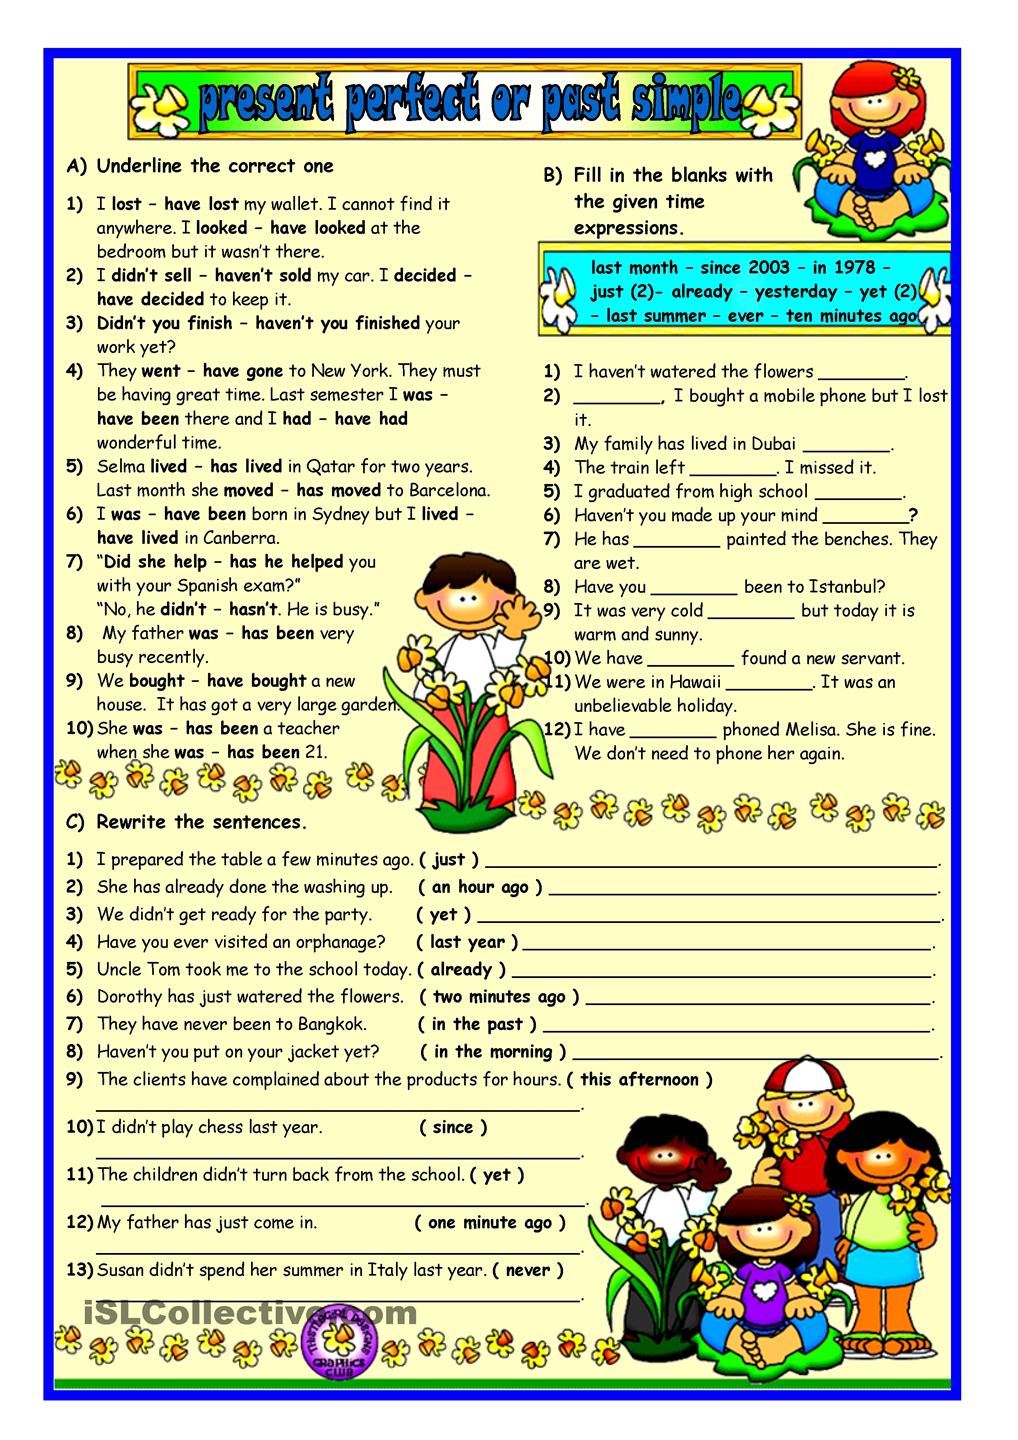 English Exercises PRESENT PERFECT SIMPLE PAST